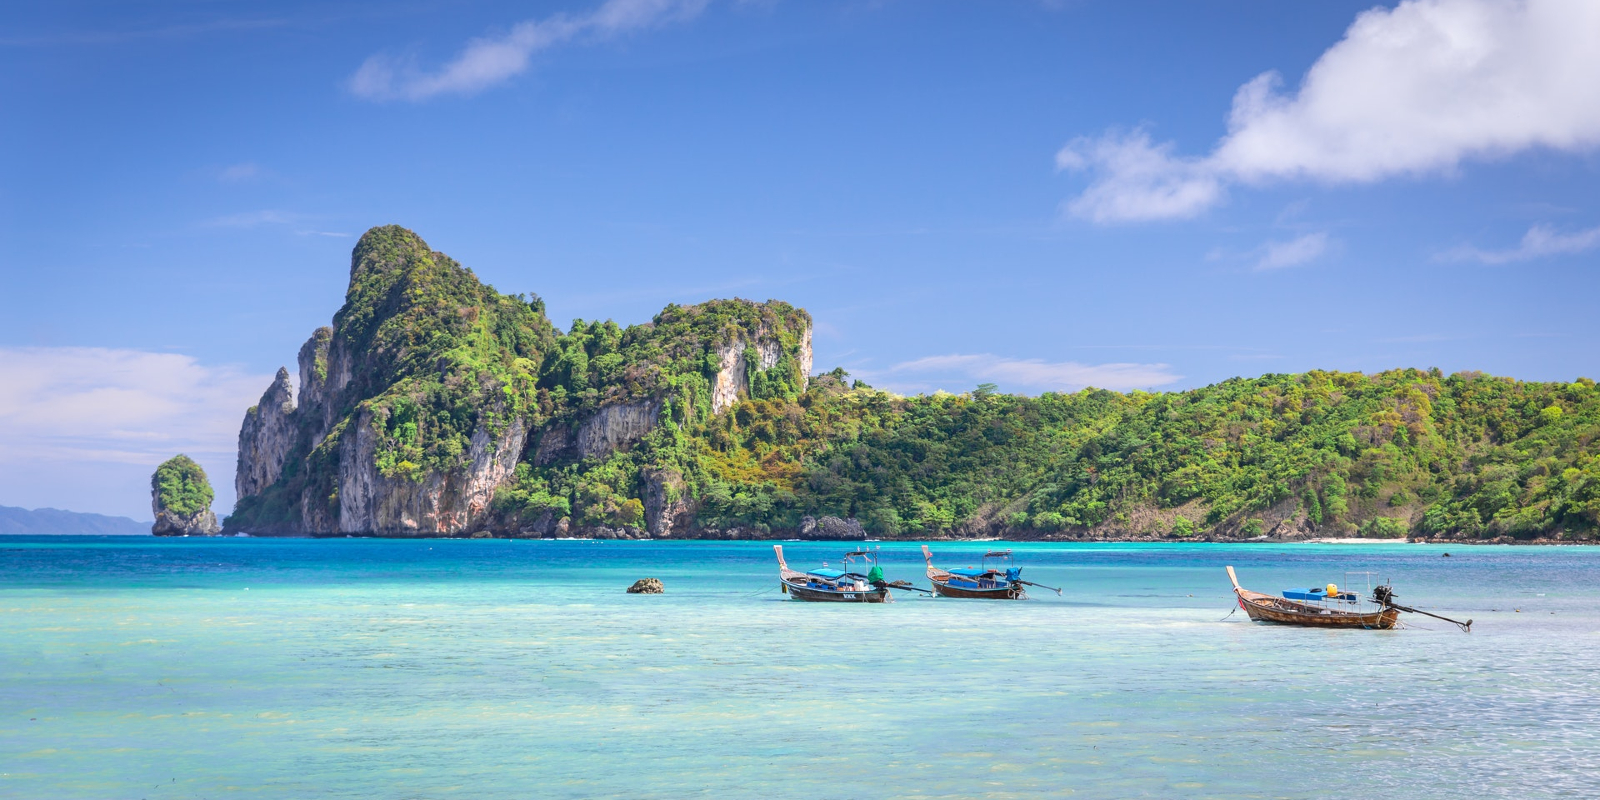 Discover all that Krabi has to offer